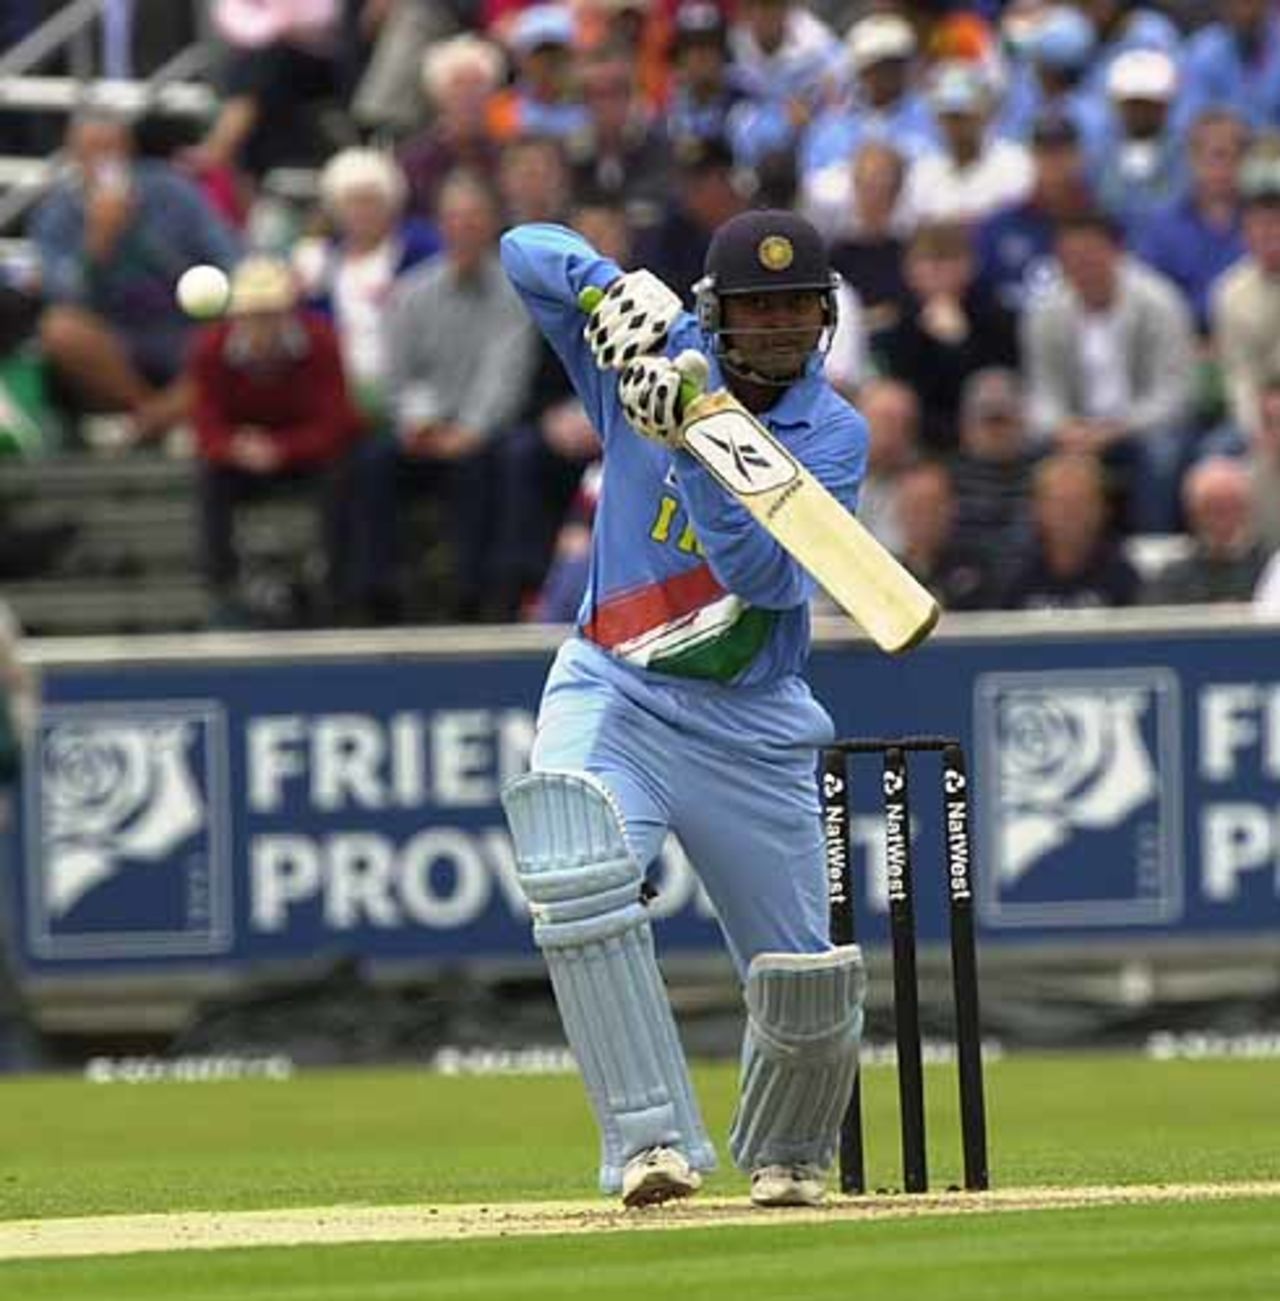 Dinesh Mongia plays to the off at the start of his innings, England v India at Chester-le-Street, July 2002